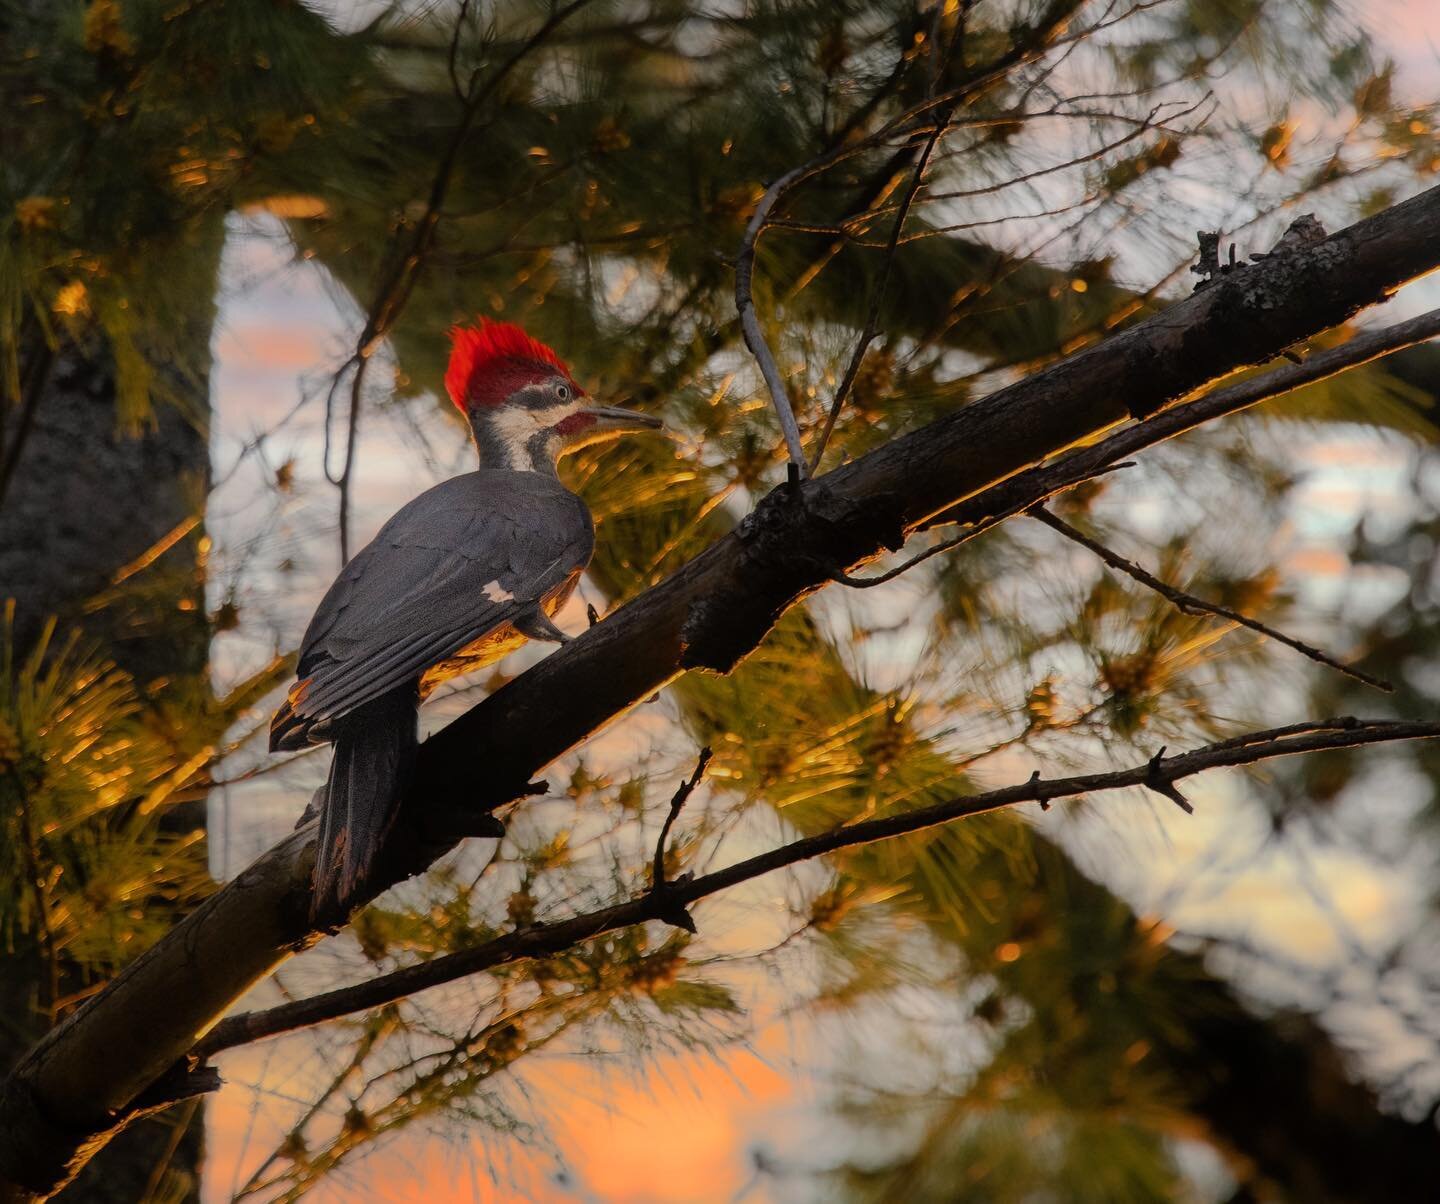 Sometimes timing just works out beautifully!!! 
.
.
.

#pileatedwoodpecker #birds_elite #sunsetshots #sunset_pics #woodpecker #ontariowildlife
#wildlifeonearth #nature_good #wildlifeconservation #wowplanet #birds_captures #earthcapture #nature_perfec